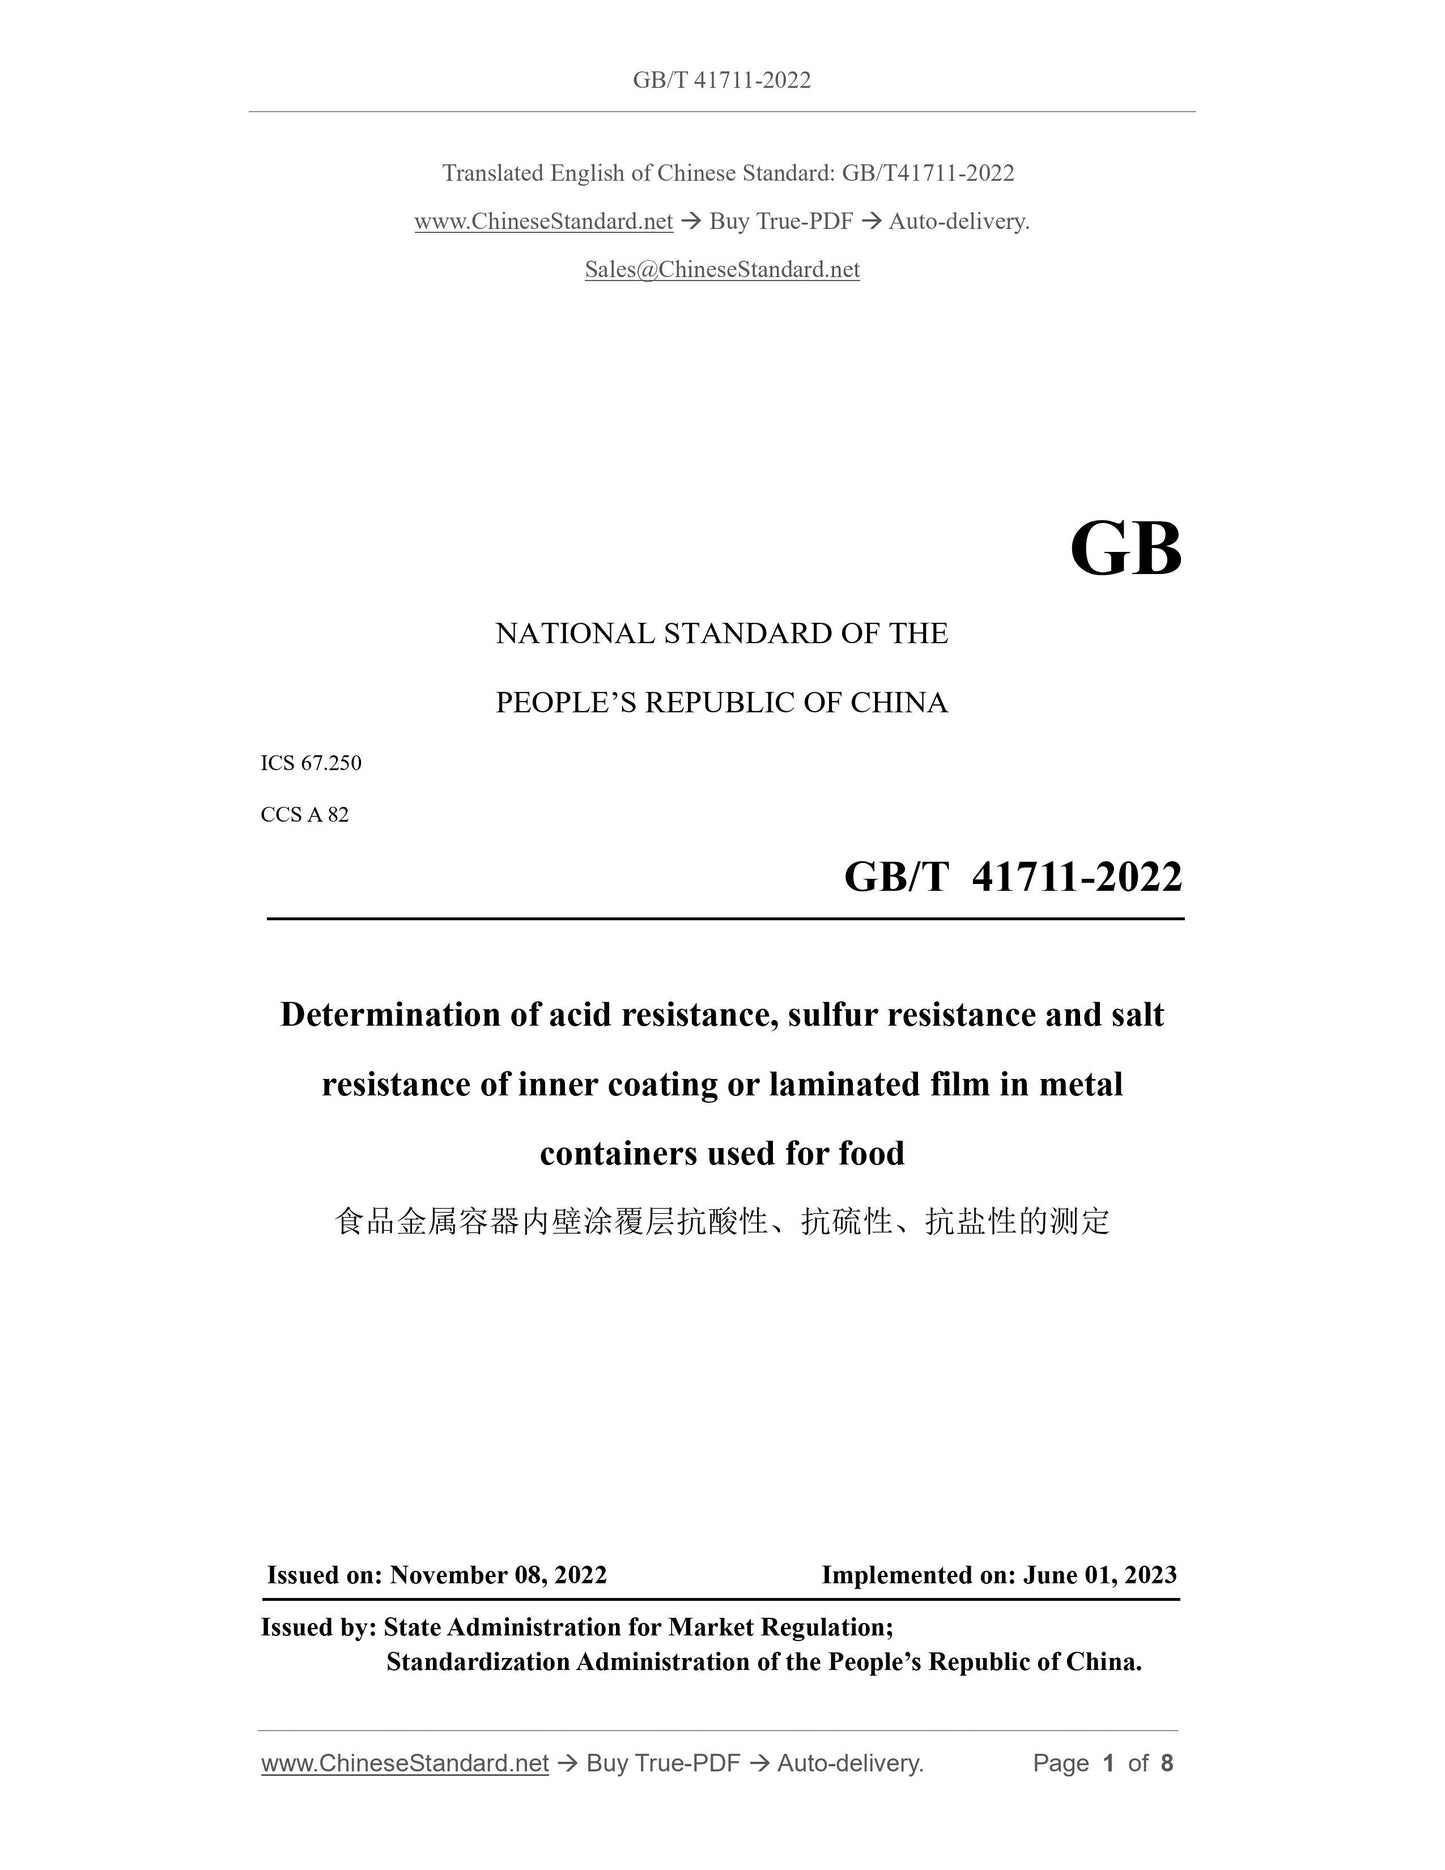 GB/T 41711-2022 Page 1